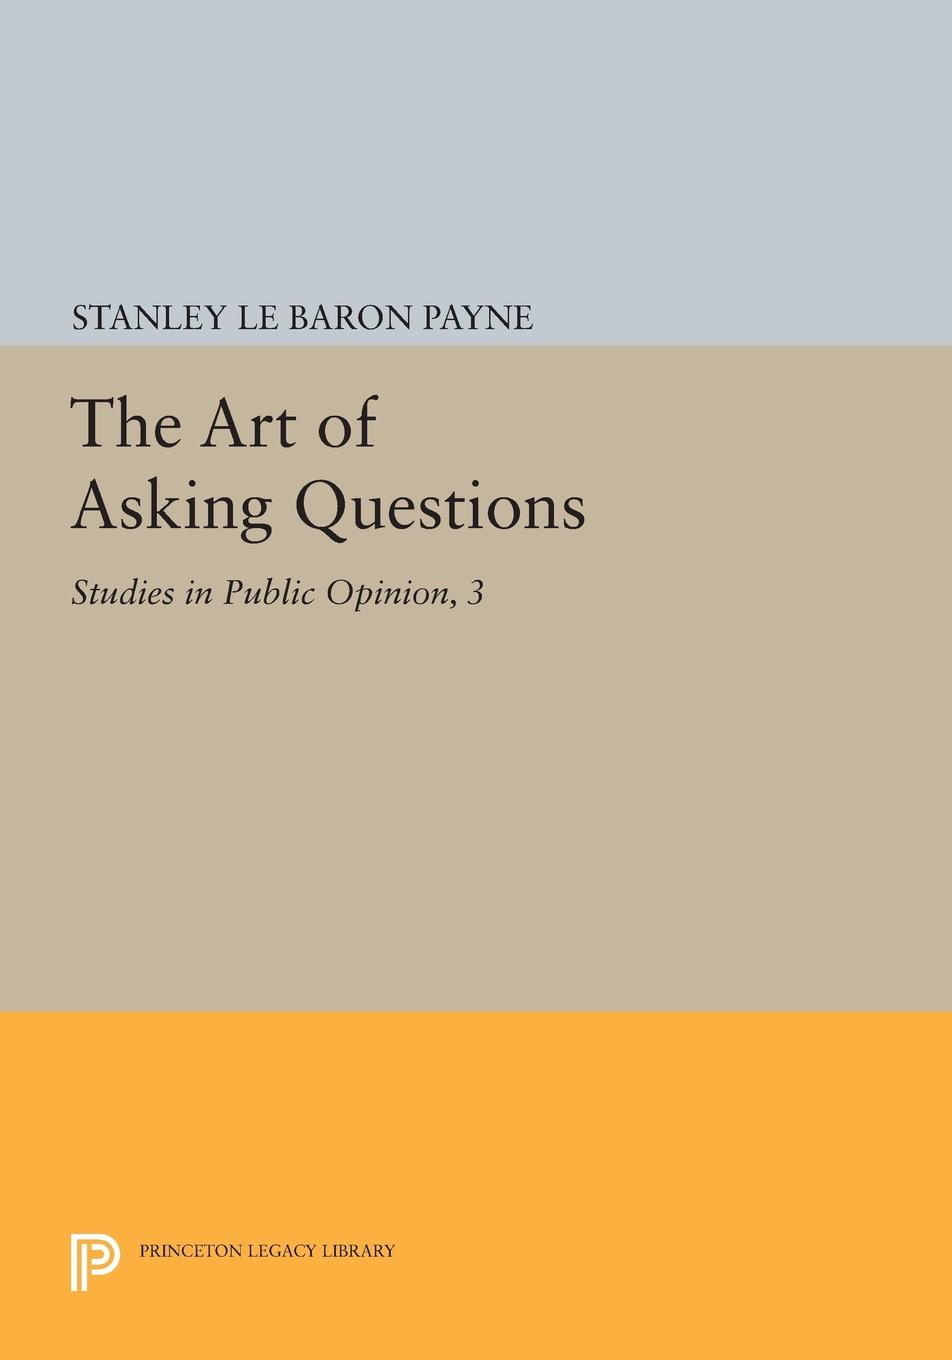 The Art of Asking Questions. Studies in Public Opinion, 3